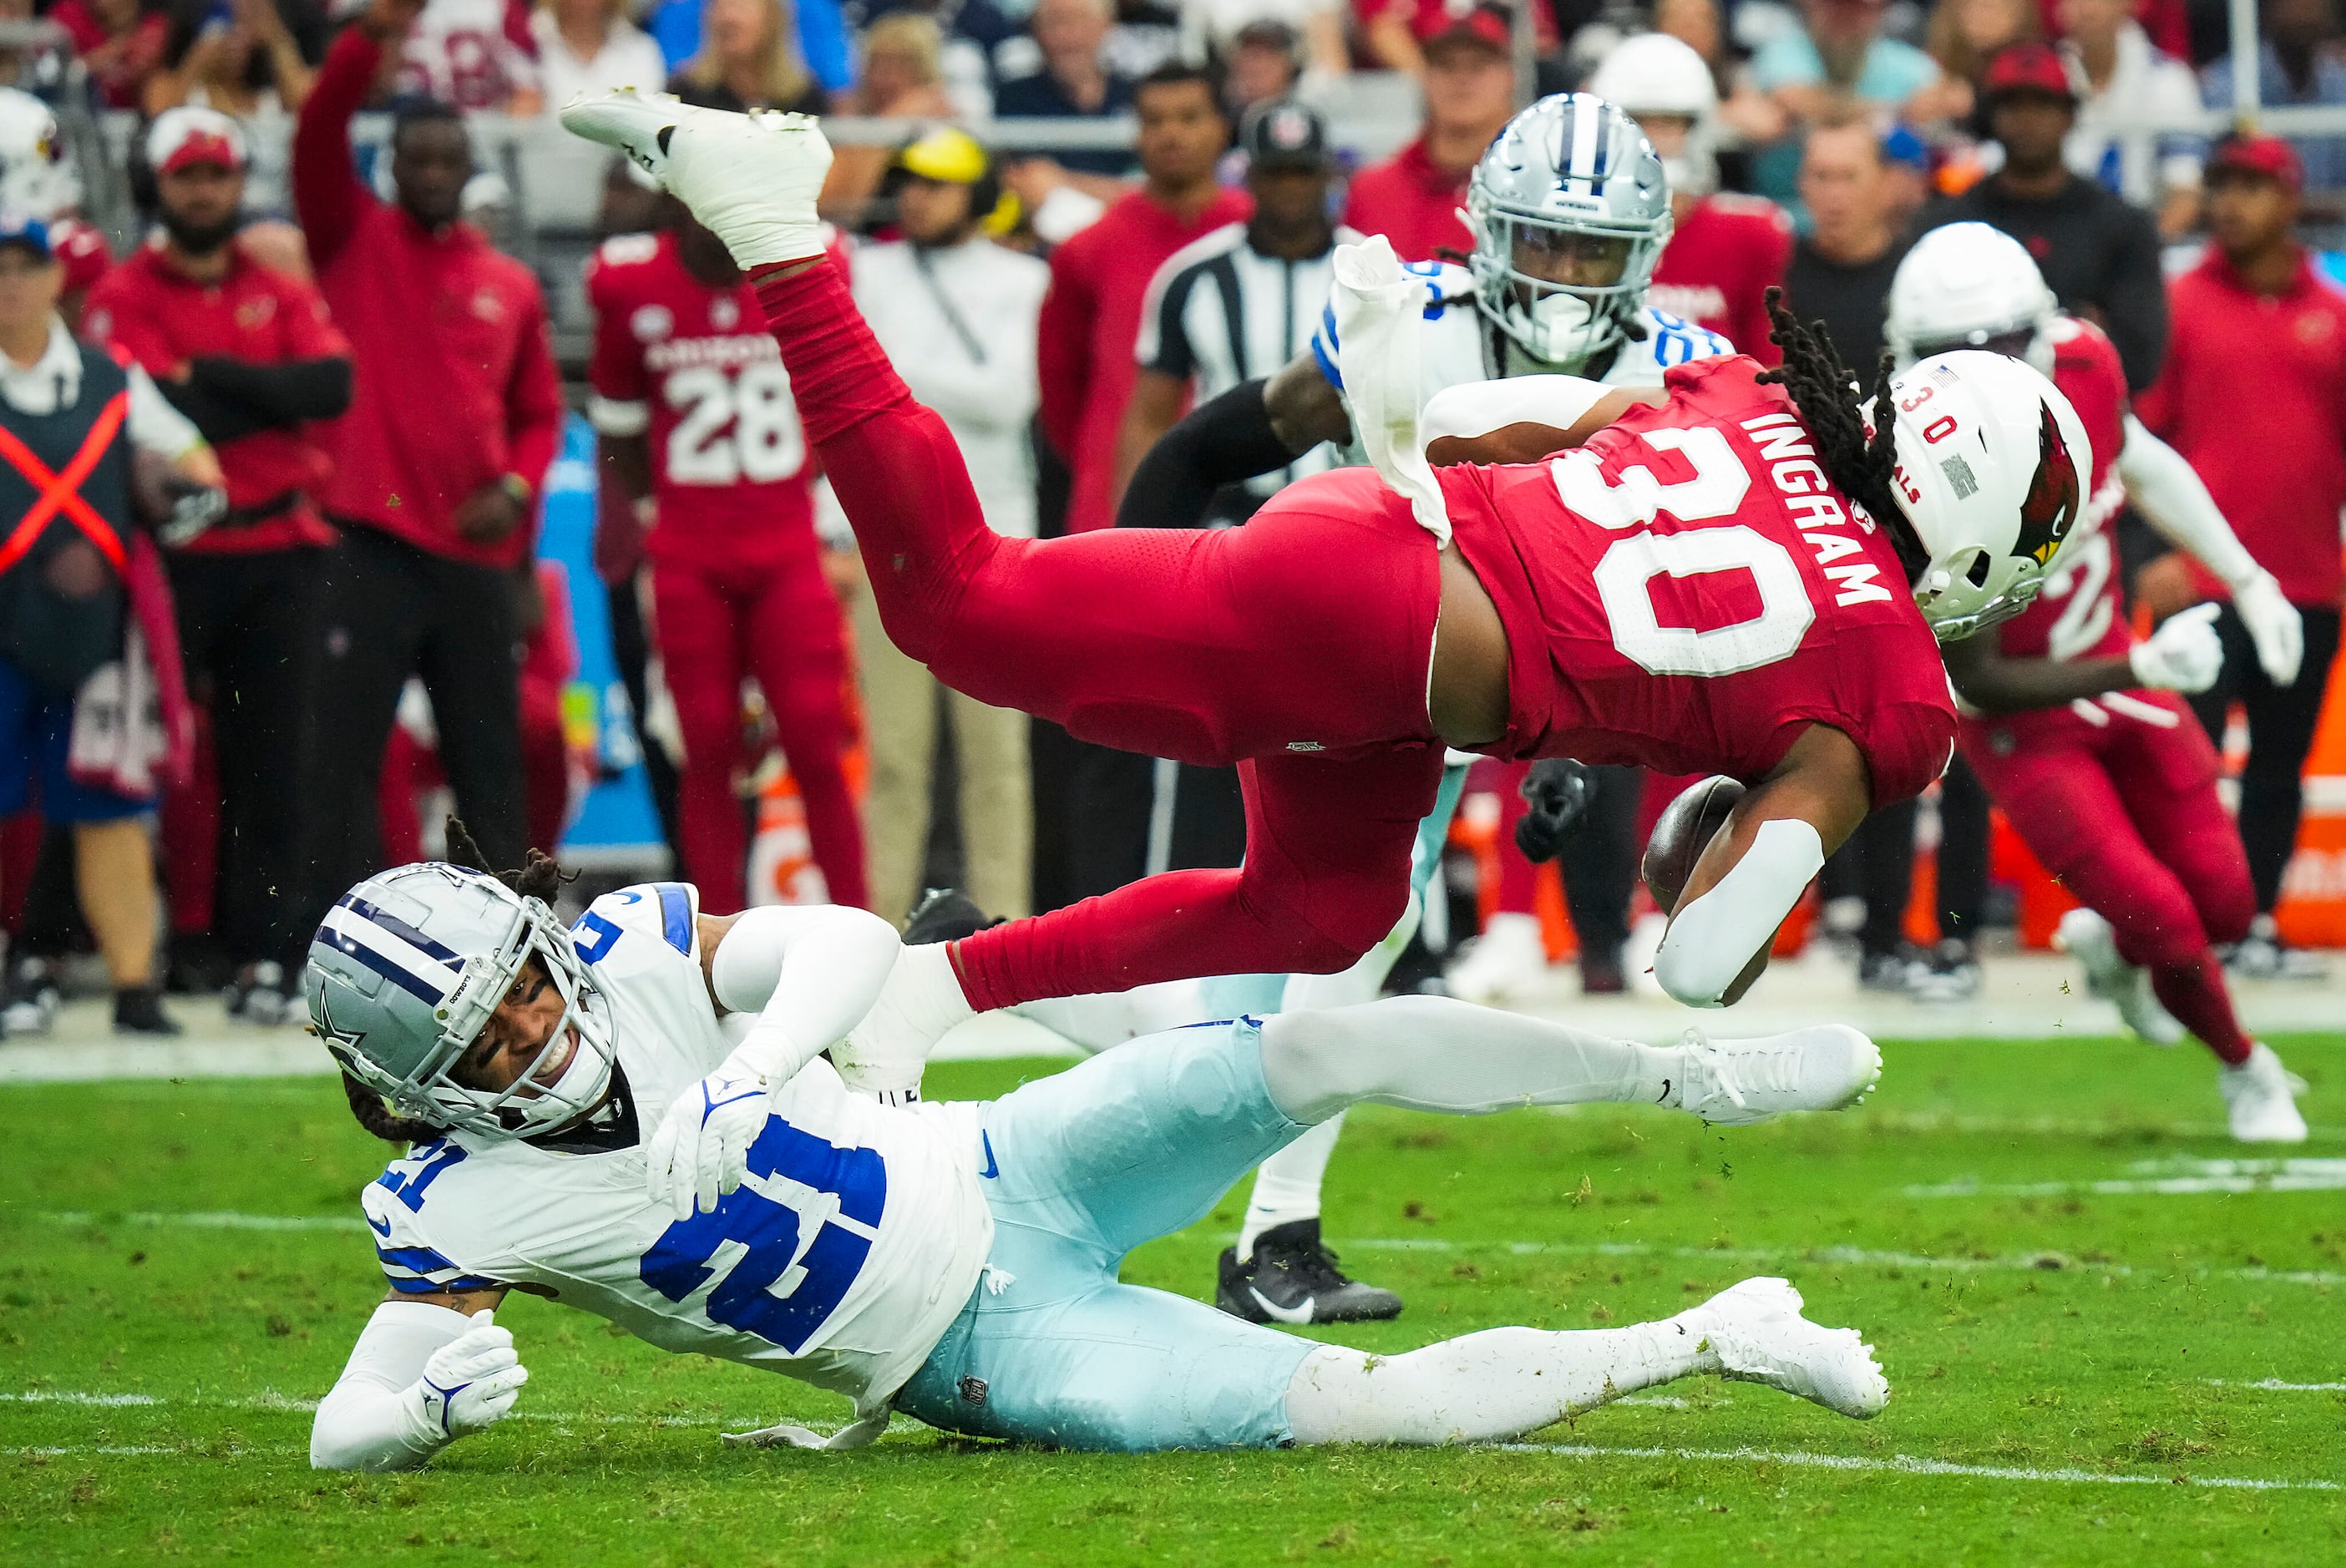 Desert disaster: See photos from the Cowboys' Week 3 loss to the Cardinals